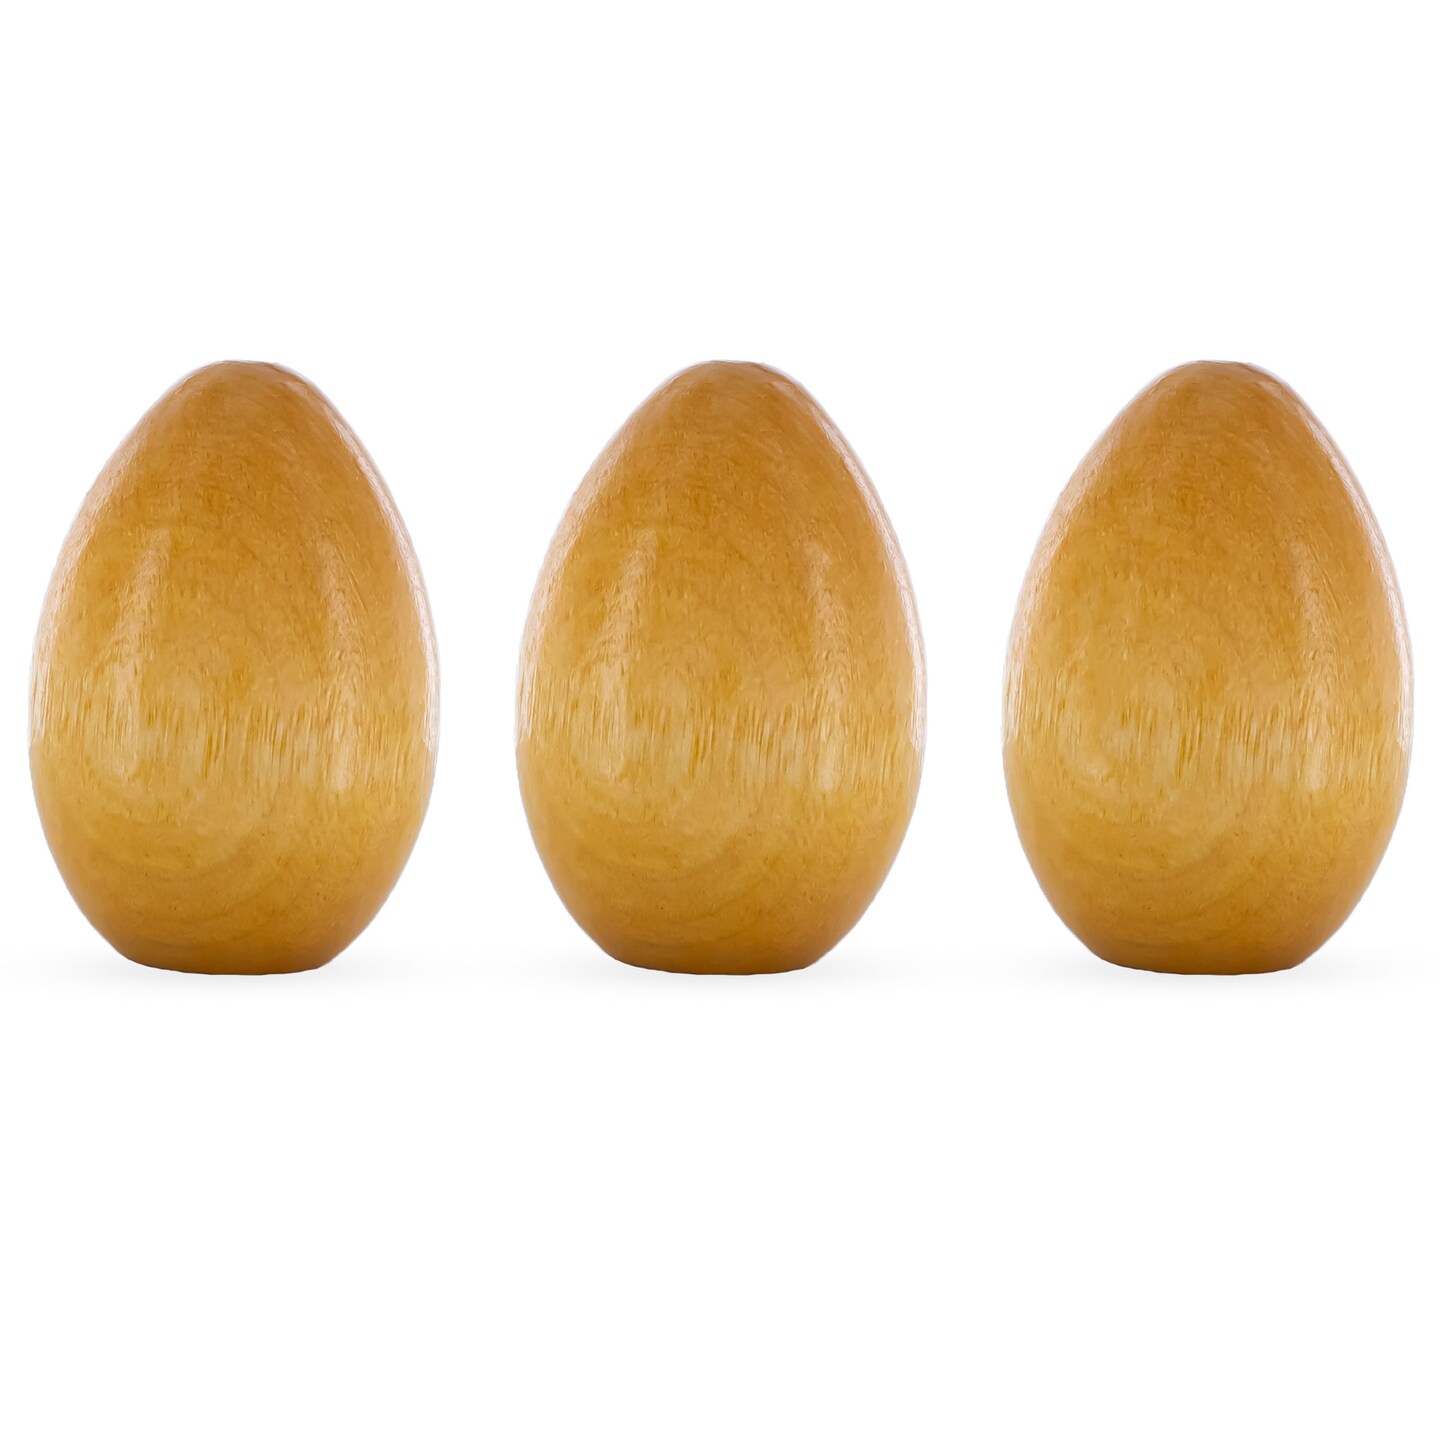 3 Miniature Lacquered Varnished Wooden Eggs 2 Inches